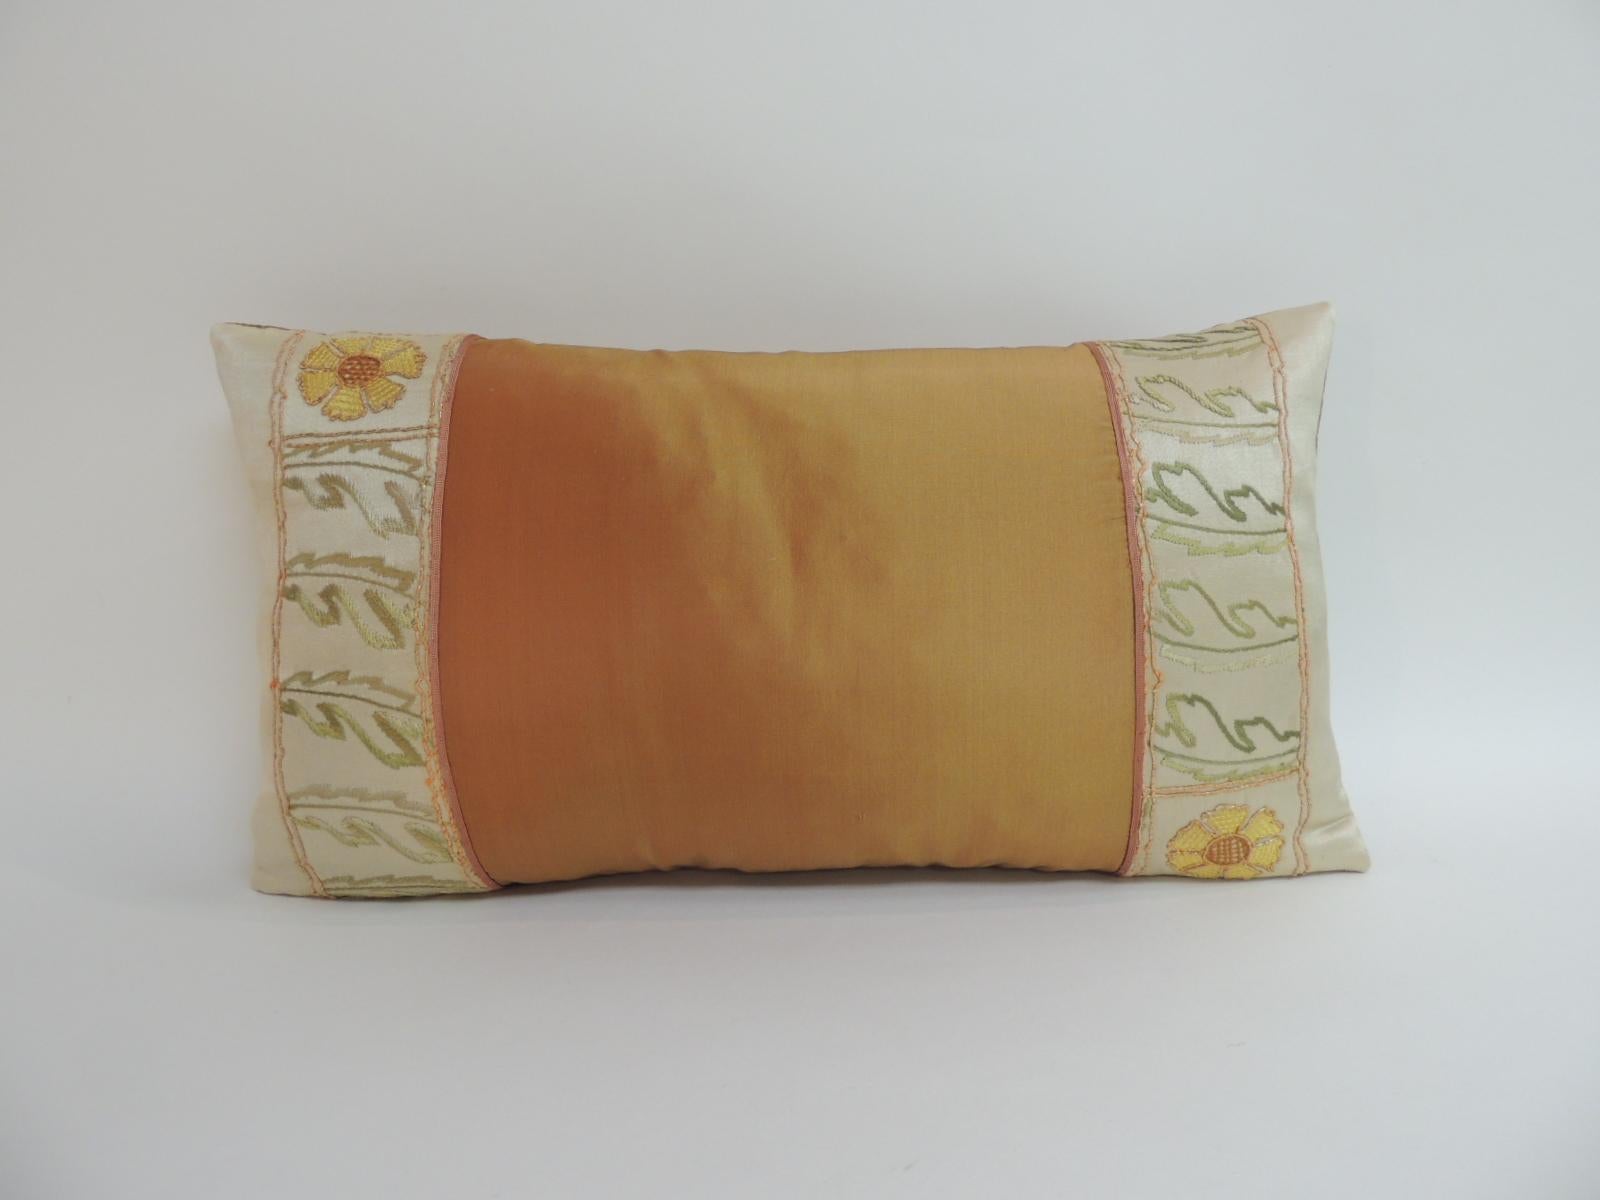 Orange Turkish embroidered silk-on-silk decorative pillow with accents of gold metallic threads in the floral embroidery. 
Orange silk inset panel and backing. Throw pillow embellished with a small flat silk decorative trim at the seams.
